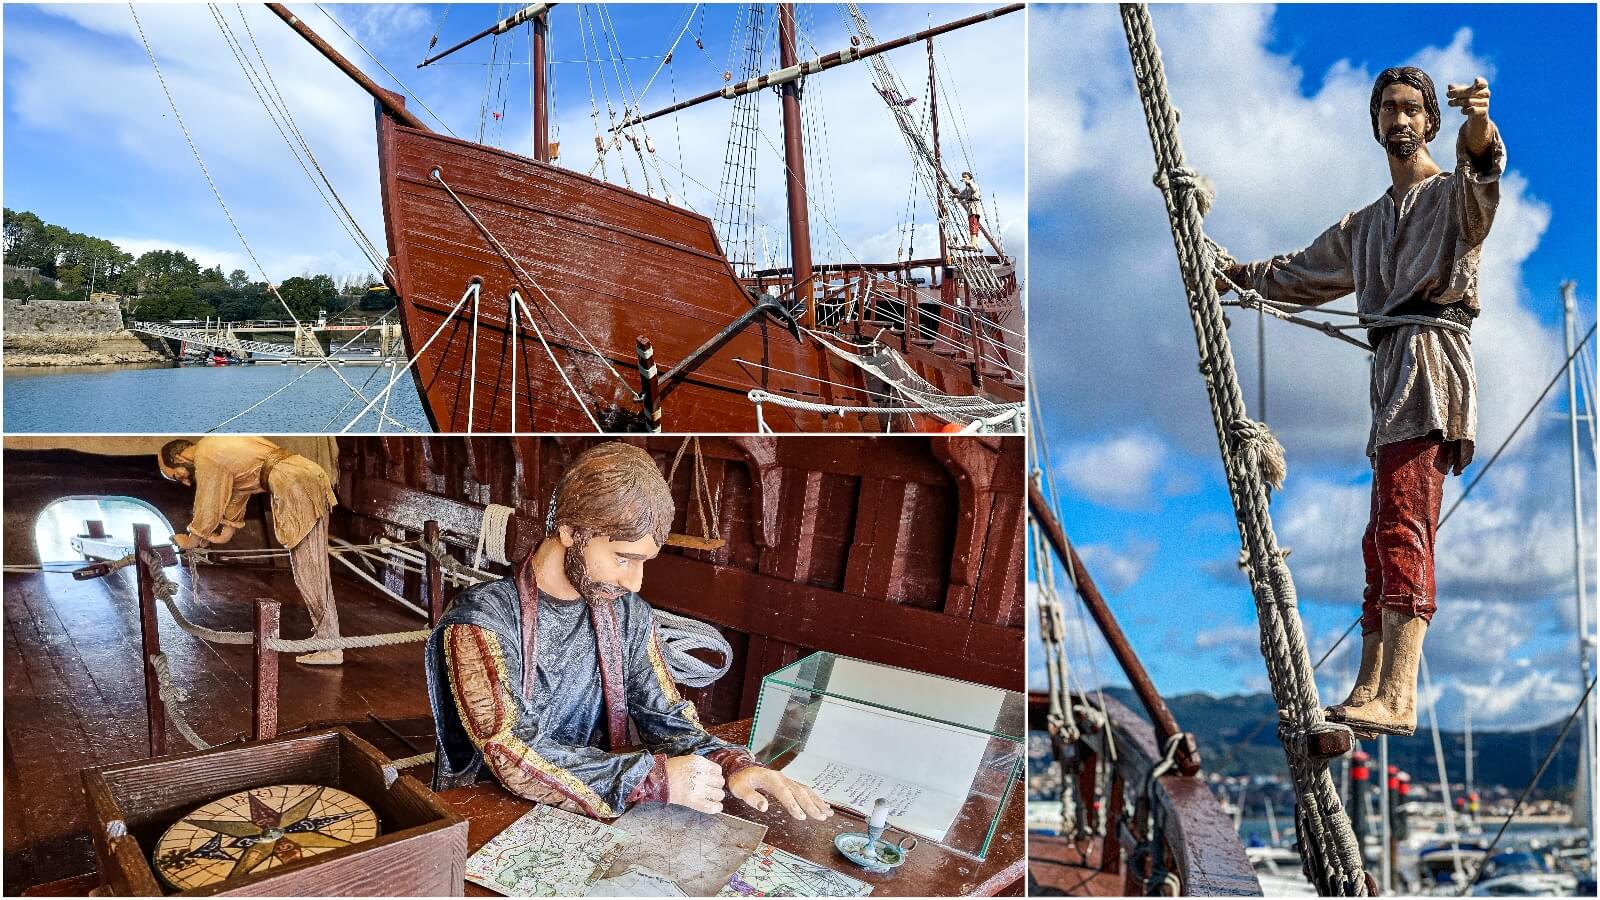 10 Best Things to do in Baiona, Galicia, Spain - 8. Climb aboard The Replica of Caravel La Pinta